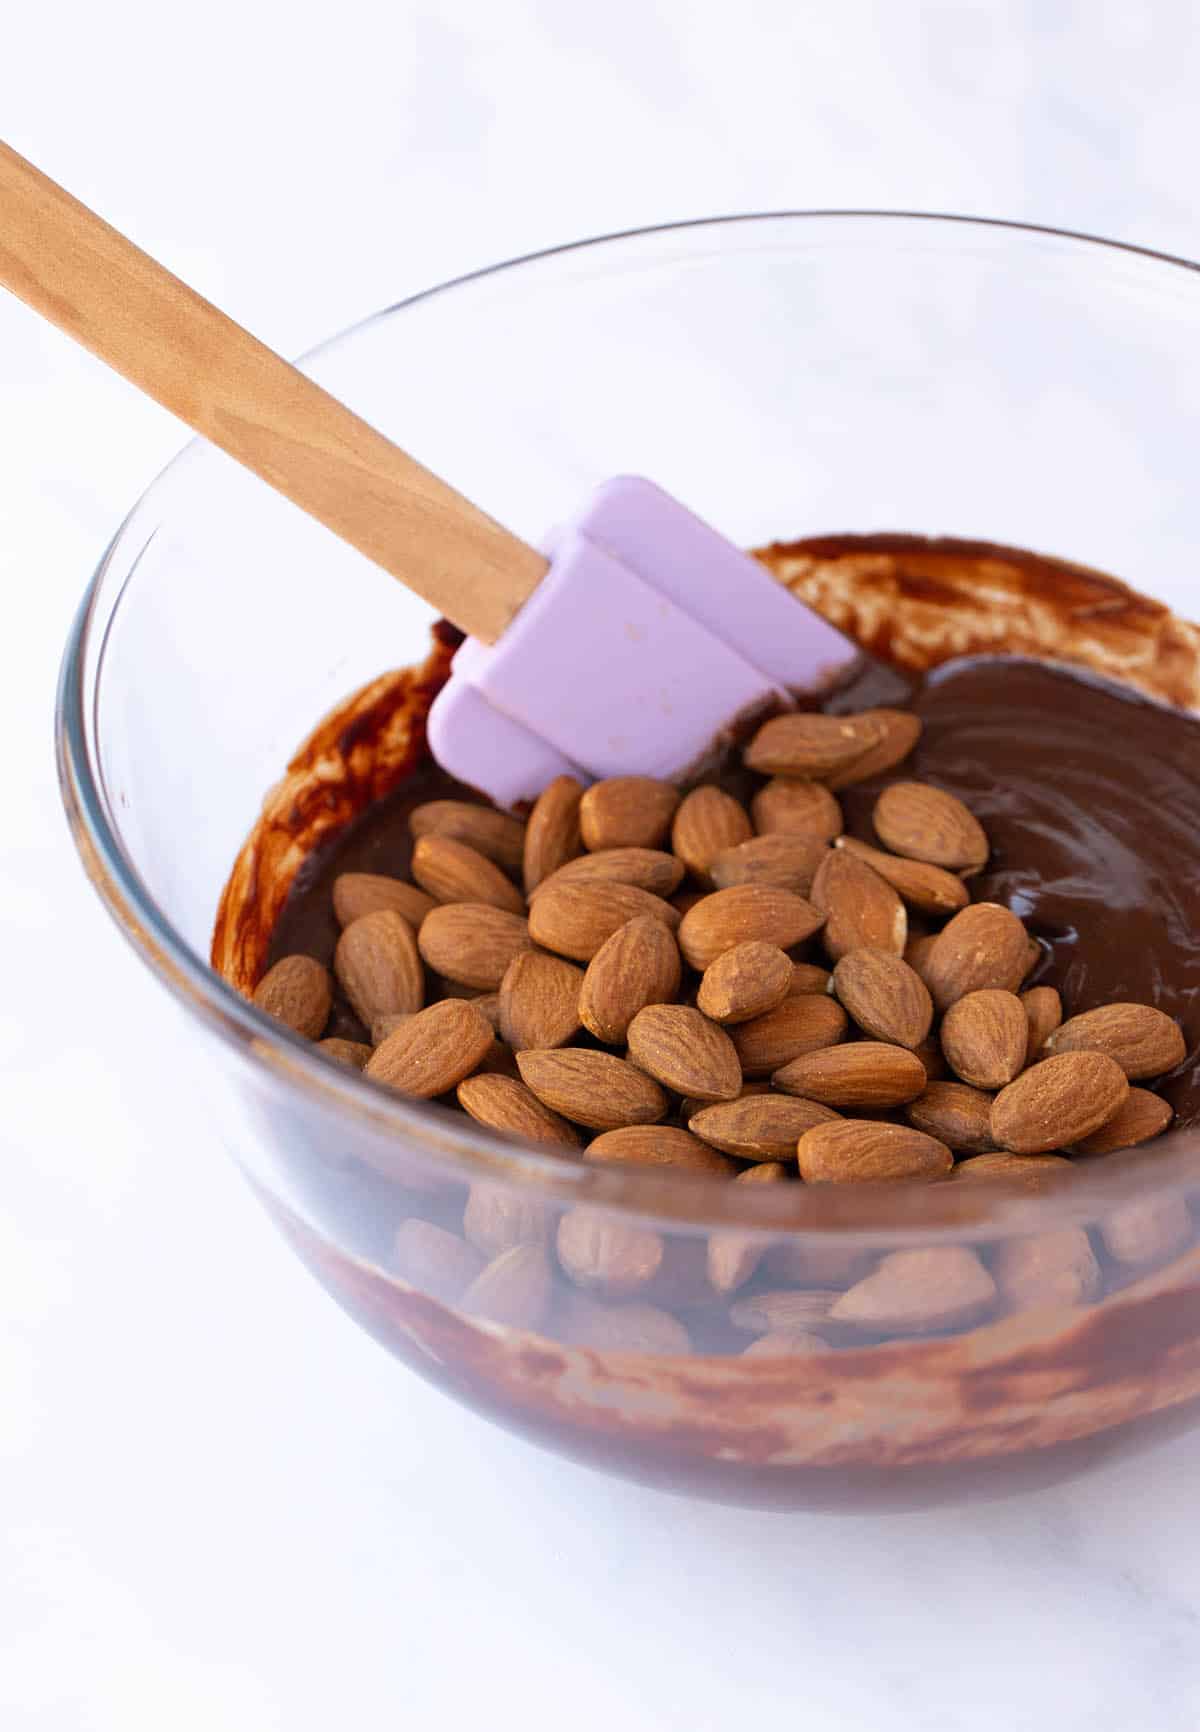 A glass bowl filled with chocolate fudge batter and almonds.